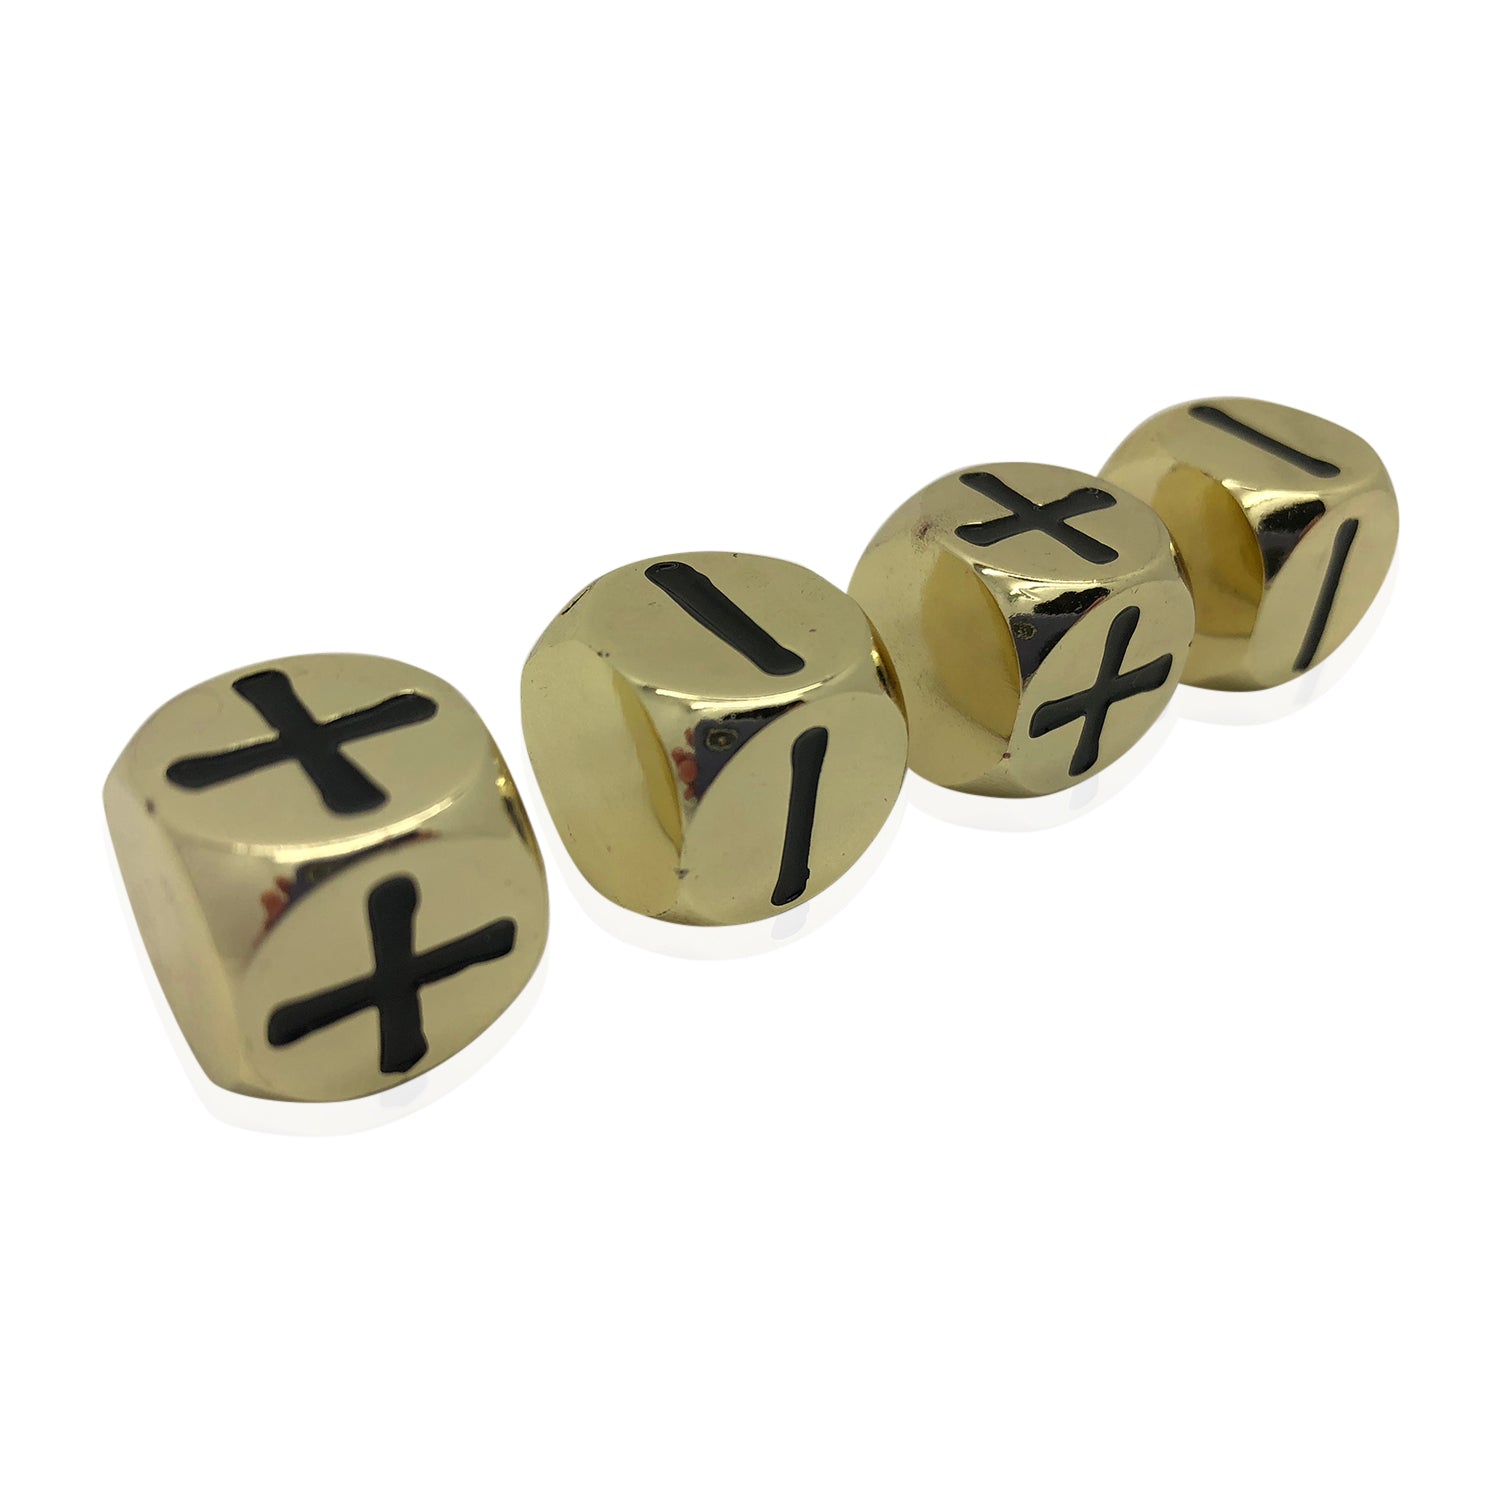 Fate Dice – Dead Man's Gold Pack of 4 Metal Dice - NOR 00711